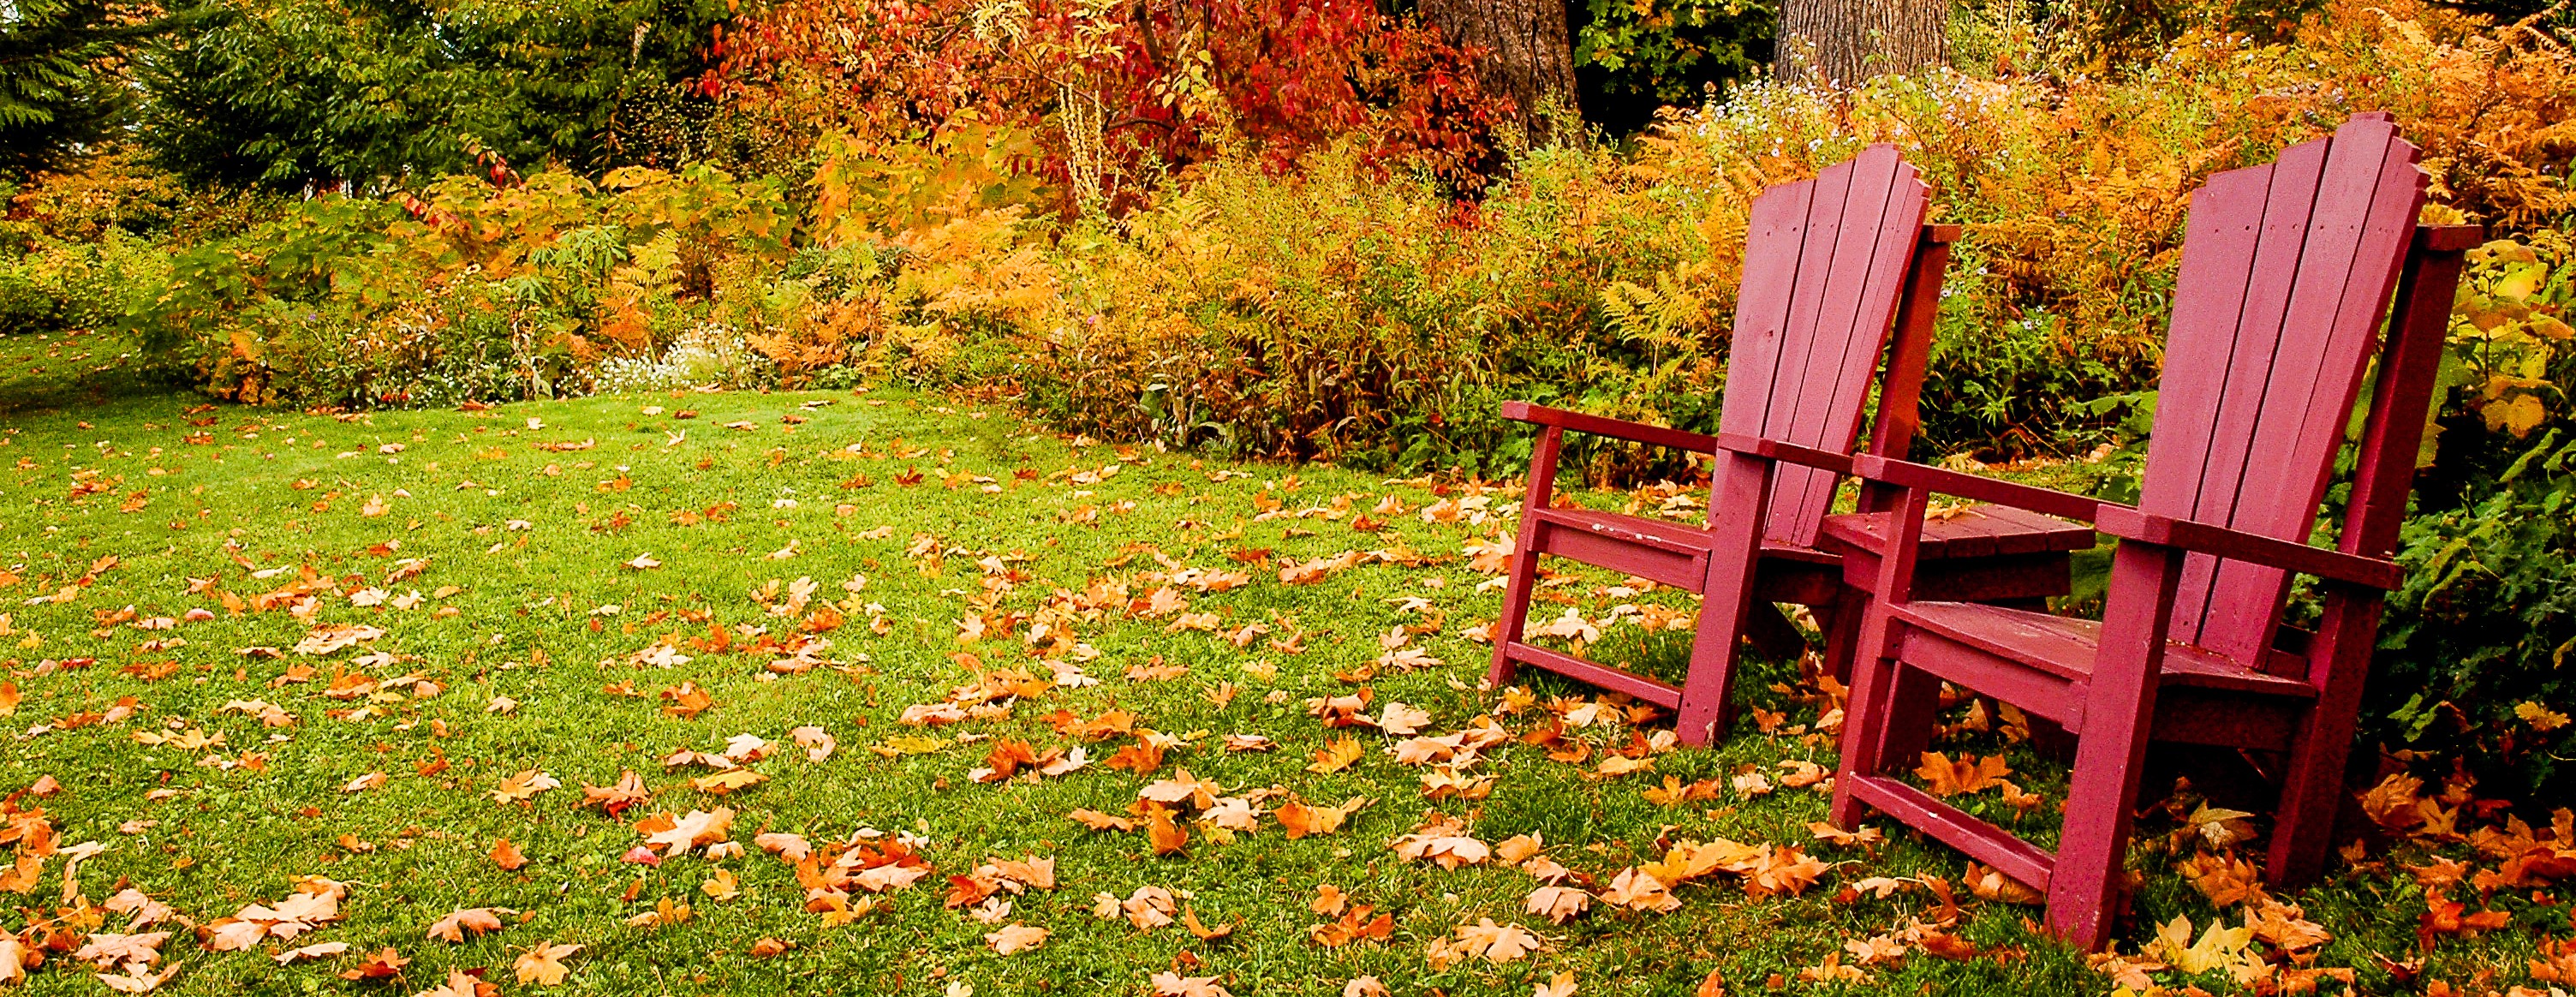 October Lawn Maintenance | Autumn Lawn Care - Boston Seeds